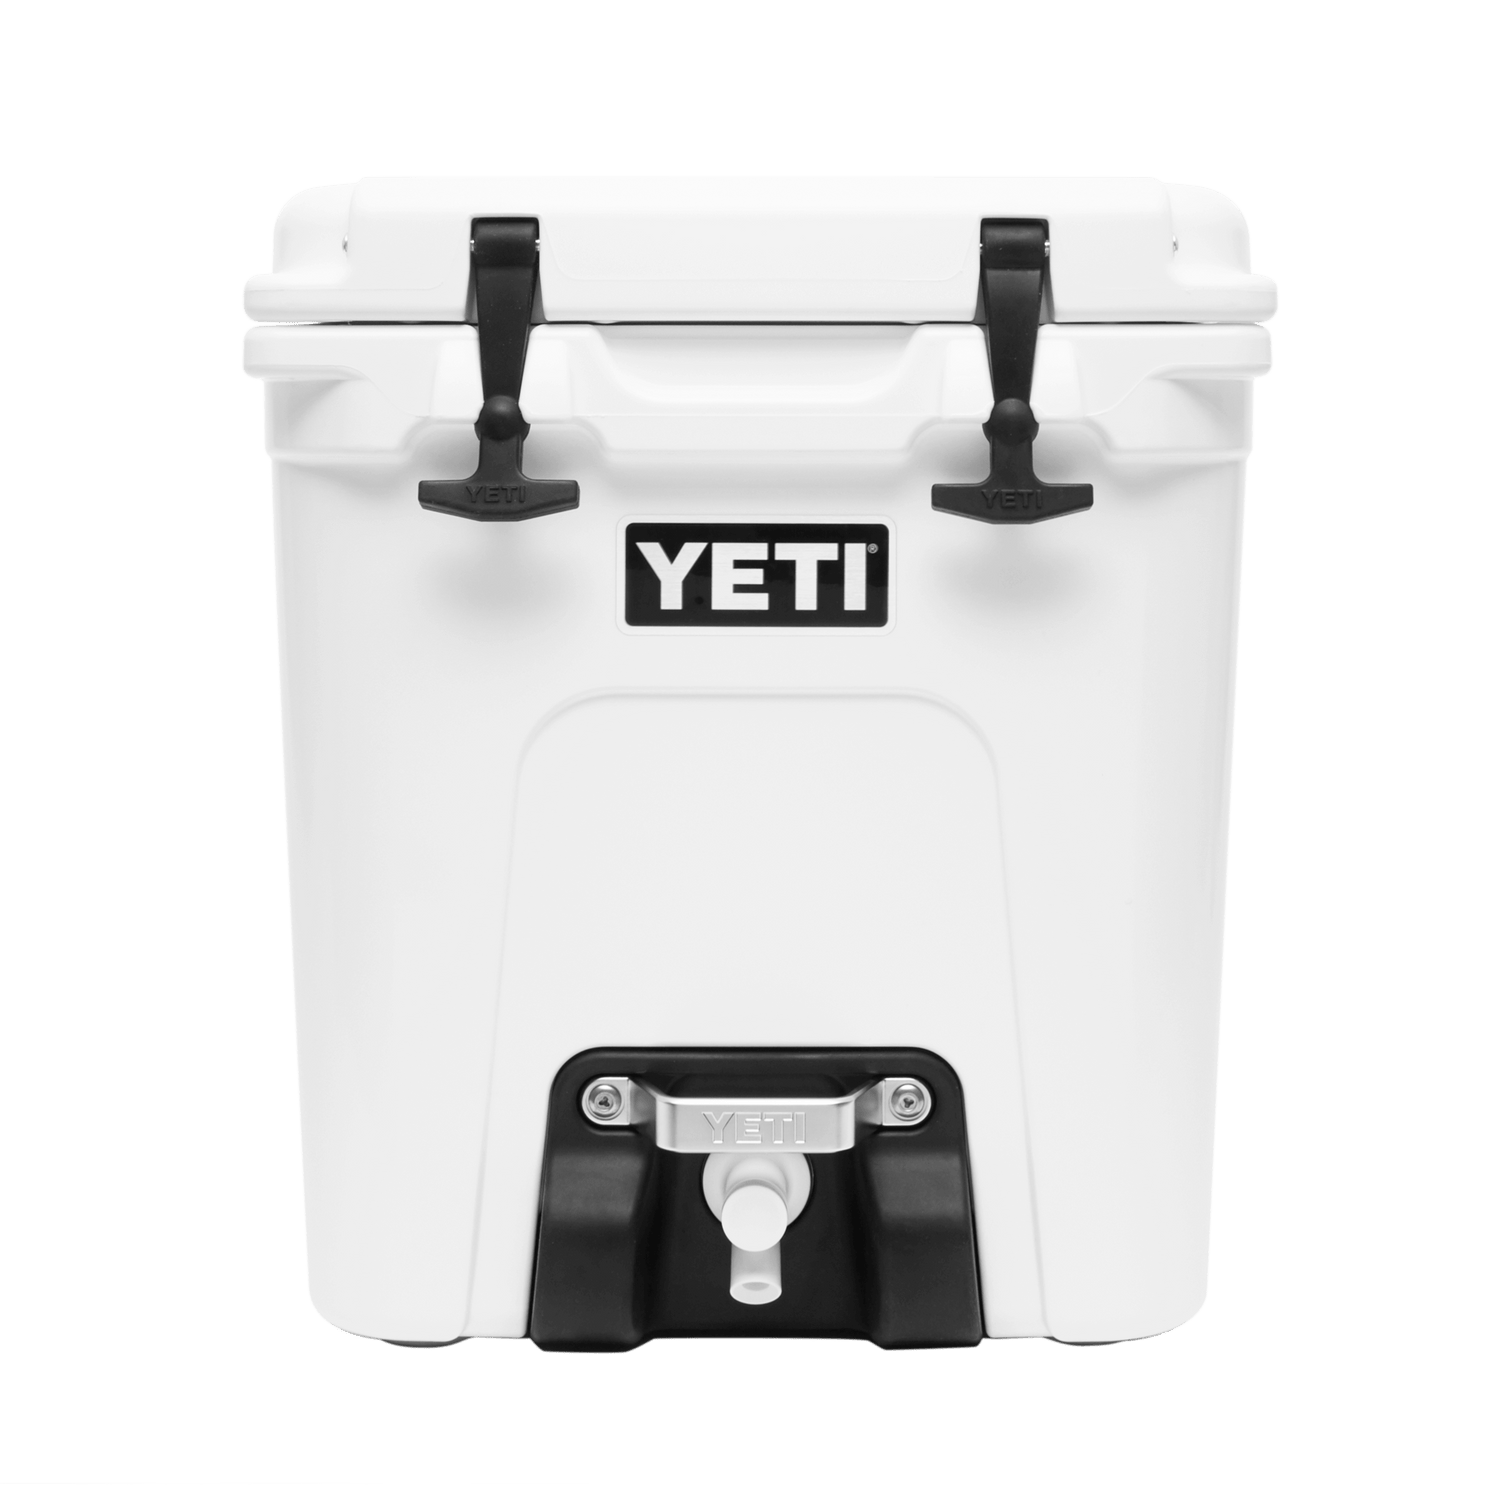 YETI Coolers for sale in Clear Lake